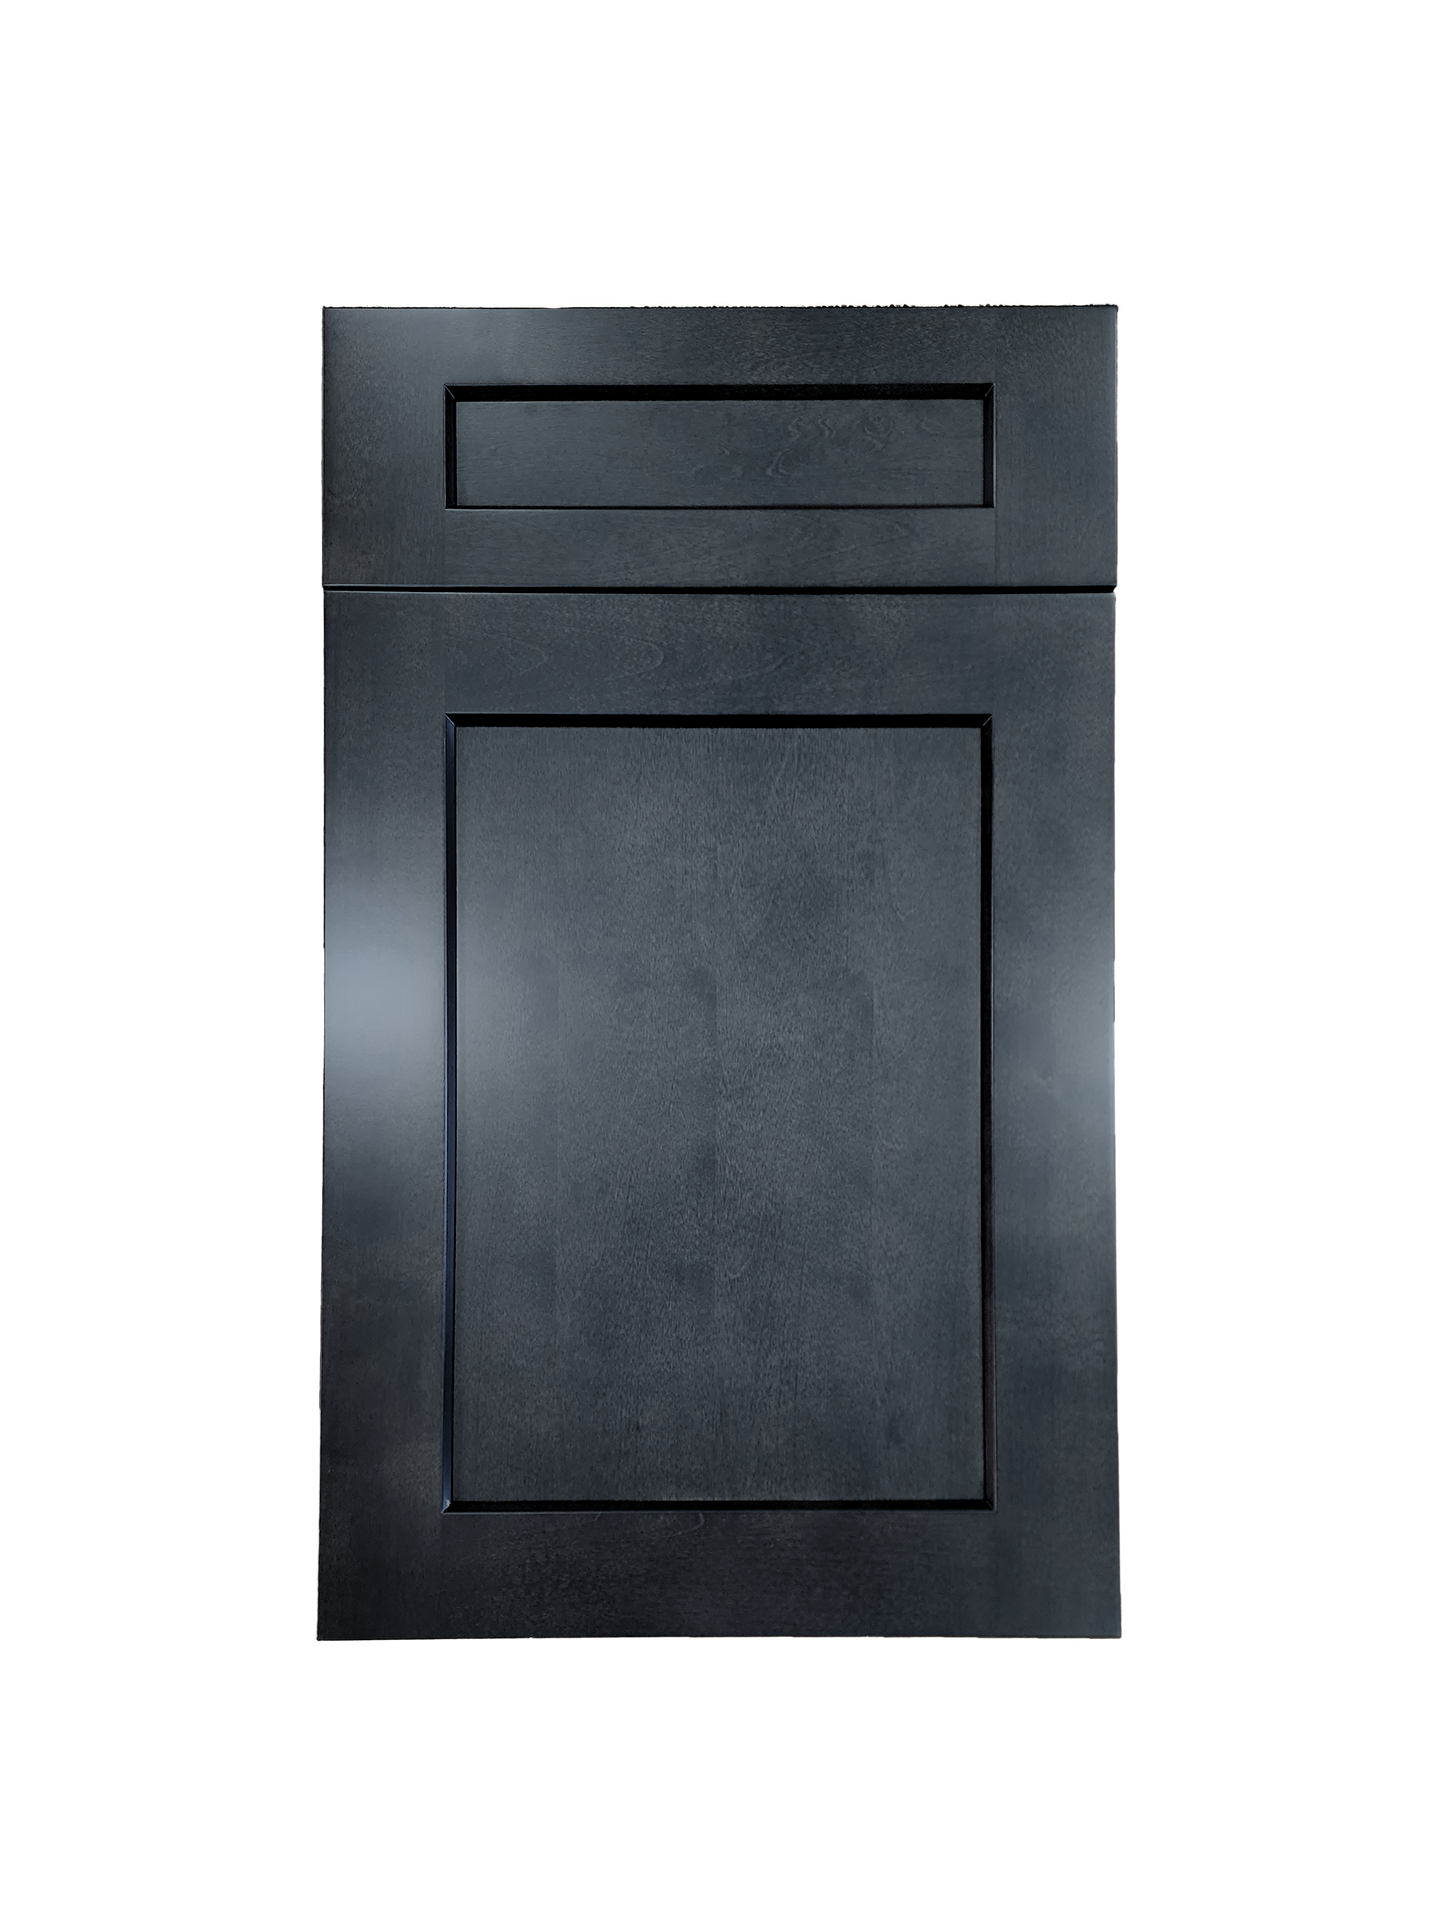 Stormy Grey Wall Cabinet 36 inches wide 12 inches deep 36 inches tall with Stormy Grey box and Stormy Grey doors